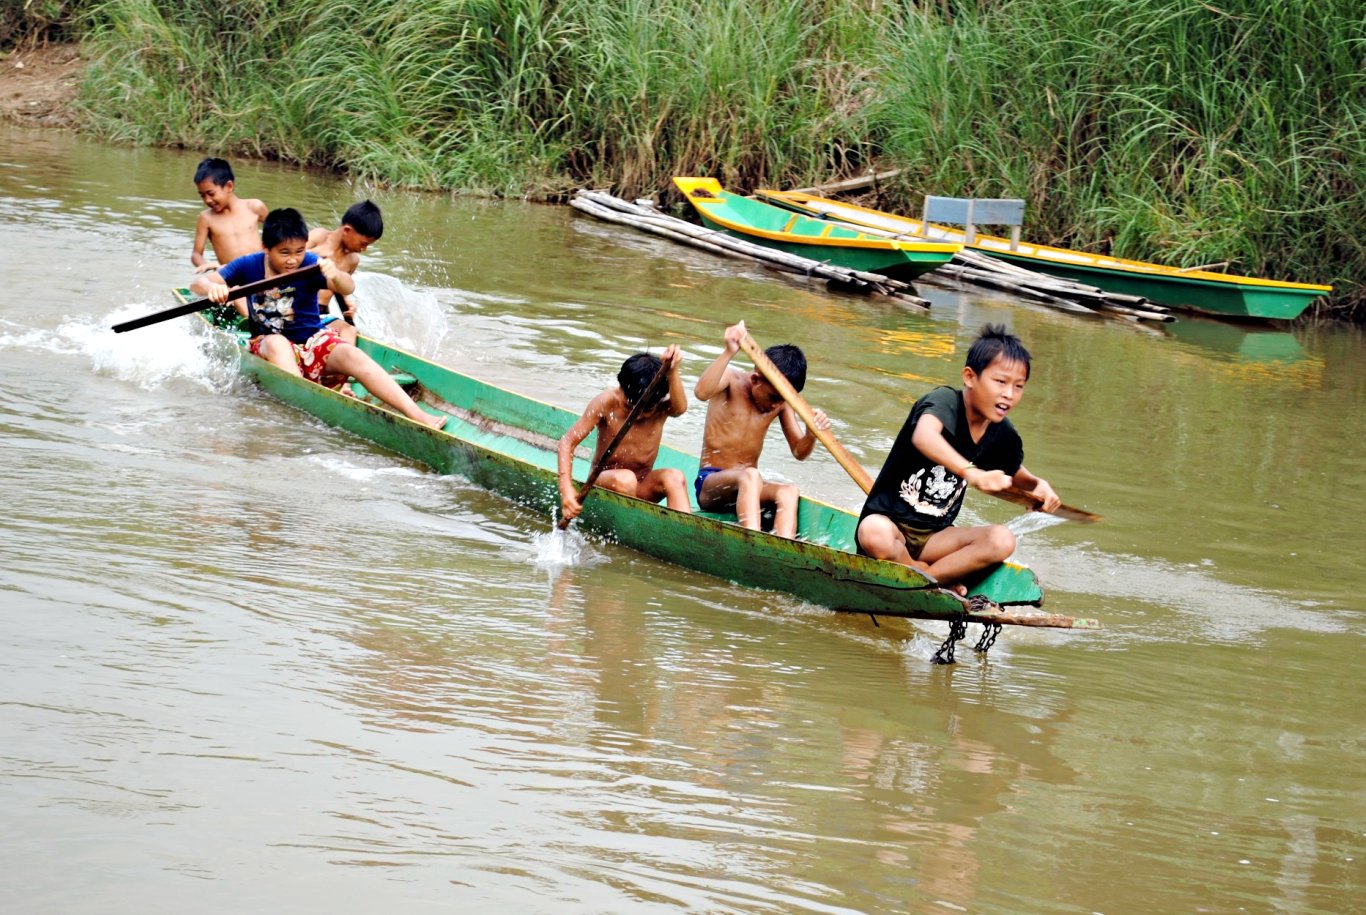 We spent sometime in Laos. We referred to our time in SE Asia as "fall break". We went tubing and kayaking, we ate BEEF which we hadn't had for the past 6 weeks in Karnataka. We had the luxury of relaxing and taking hot showers. It was wonderful. What we really great was witnessing children being children. These boys rowing up and down the river in this narrow boat just for FUN. They weren't sitting in front of a tv watching reruns of old cartoons, they weren't playing video games, they were outside pretending to be pirates. Well, maybe not pirates, but it was so cool to see children who just wanted to run around in their skivvies and jump off stuff. KIDS being KIDS. Who woulda thought?